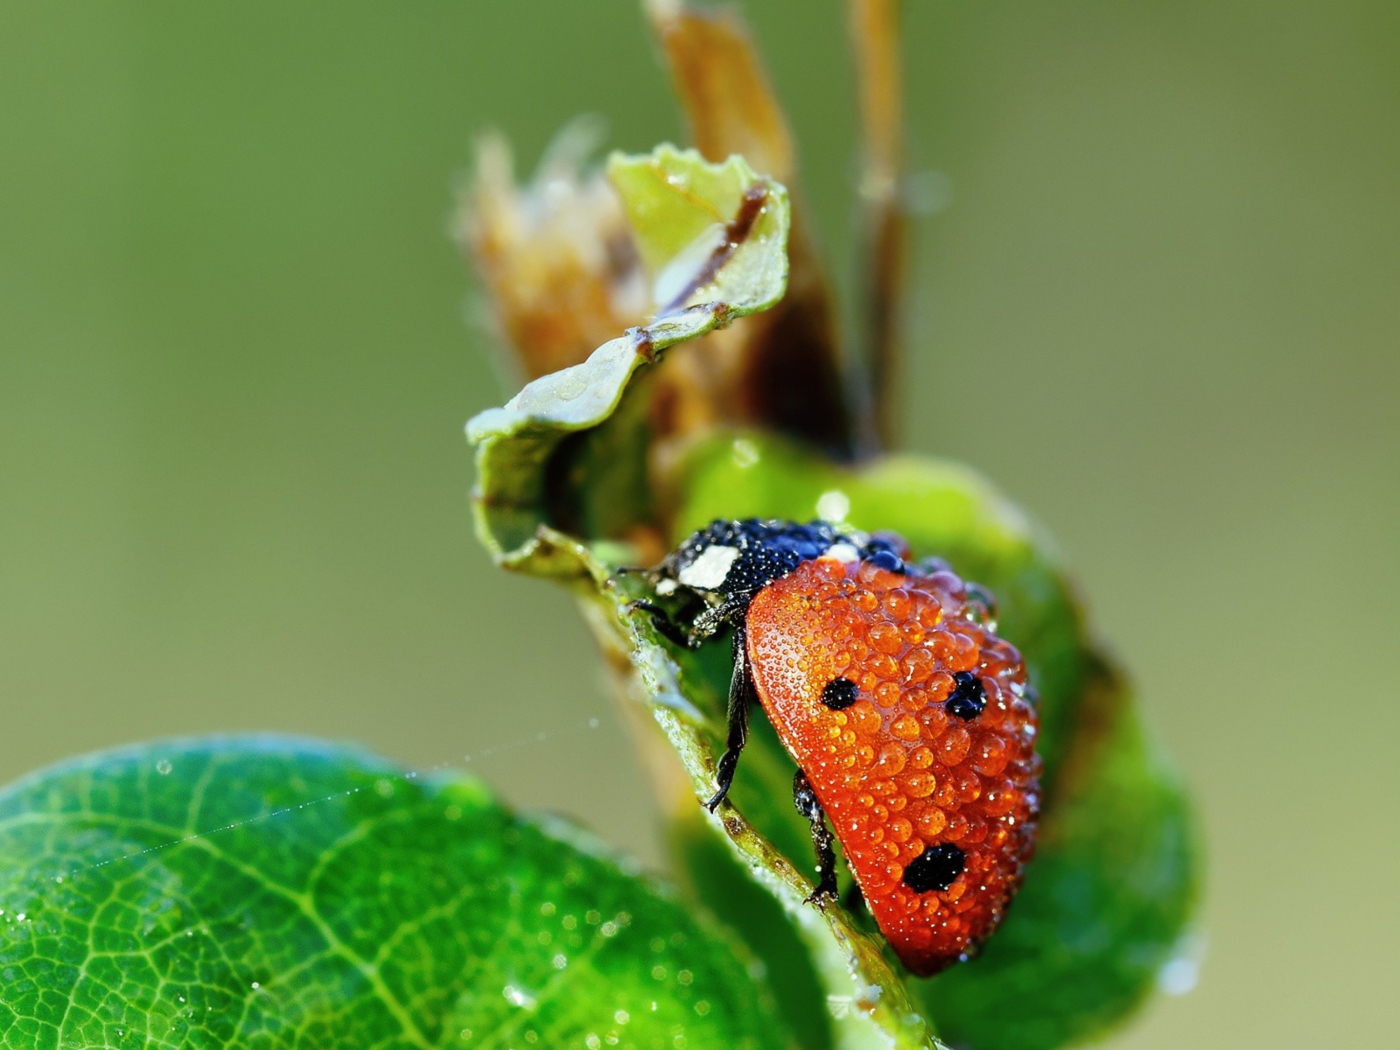 Ladybug Covered With Dew Drops screenshot #1 1400x1050